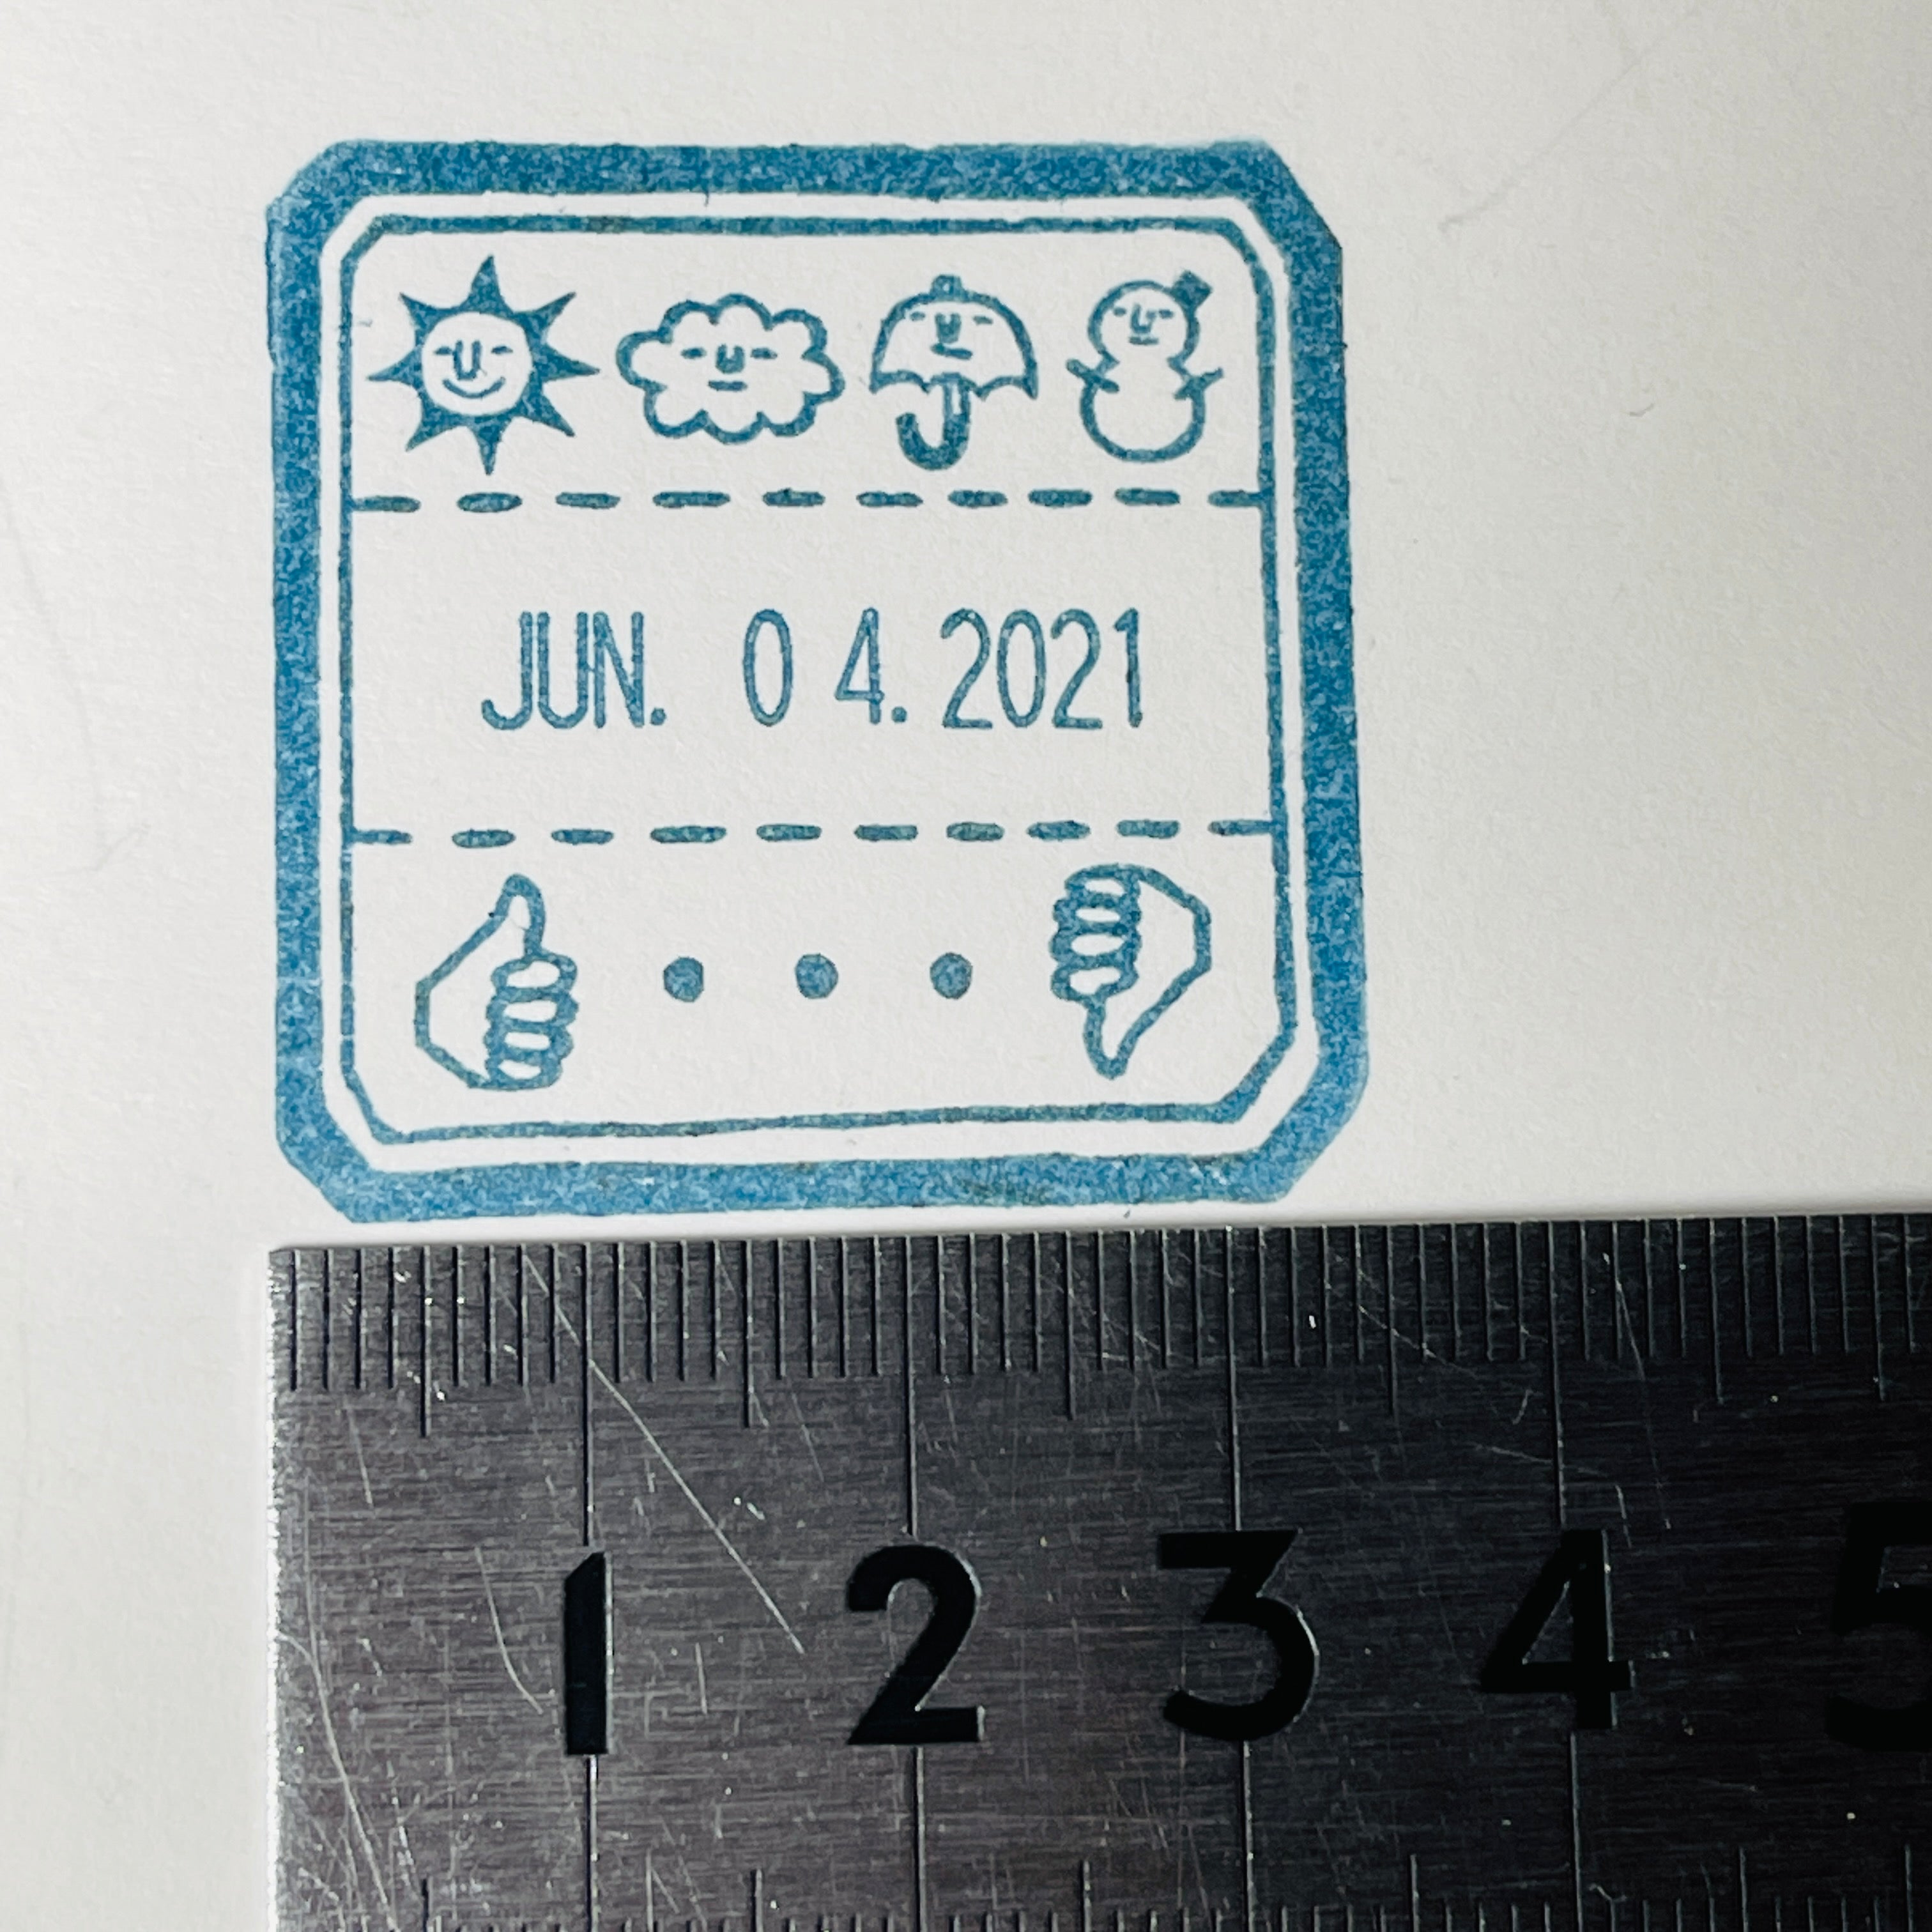 Rotating Date Stamp With Adjustable Dials "Daily Log!" (Weather, Health, Date)